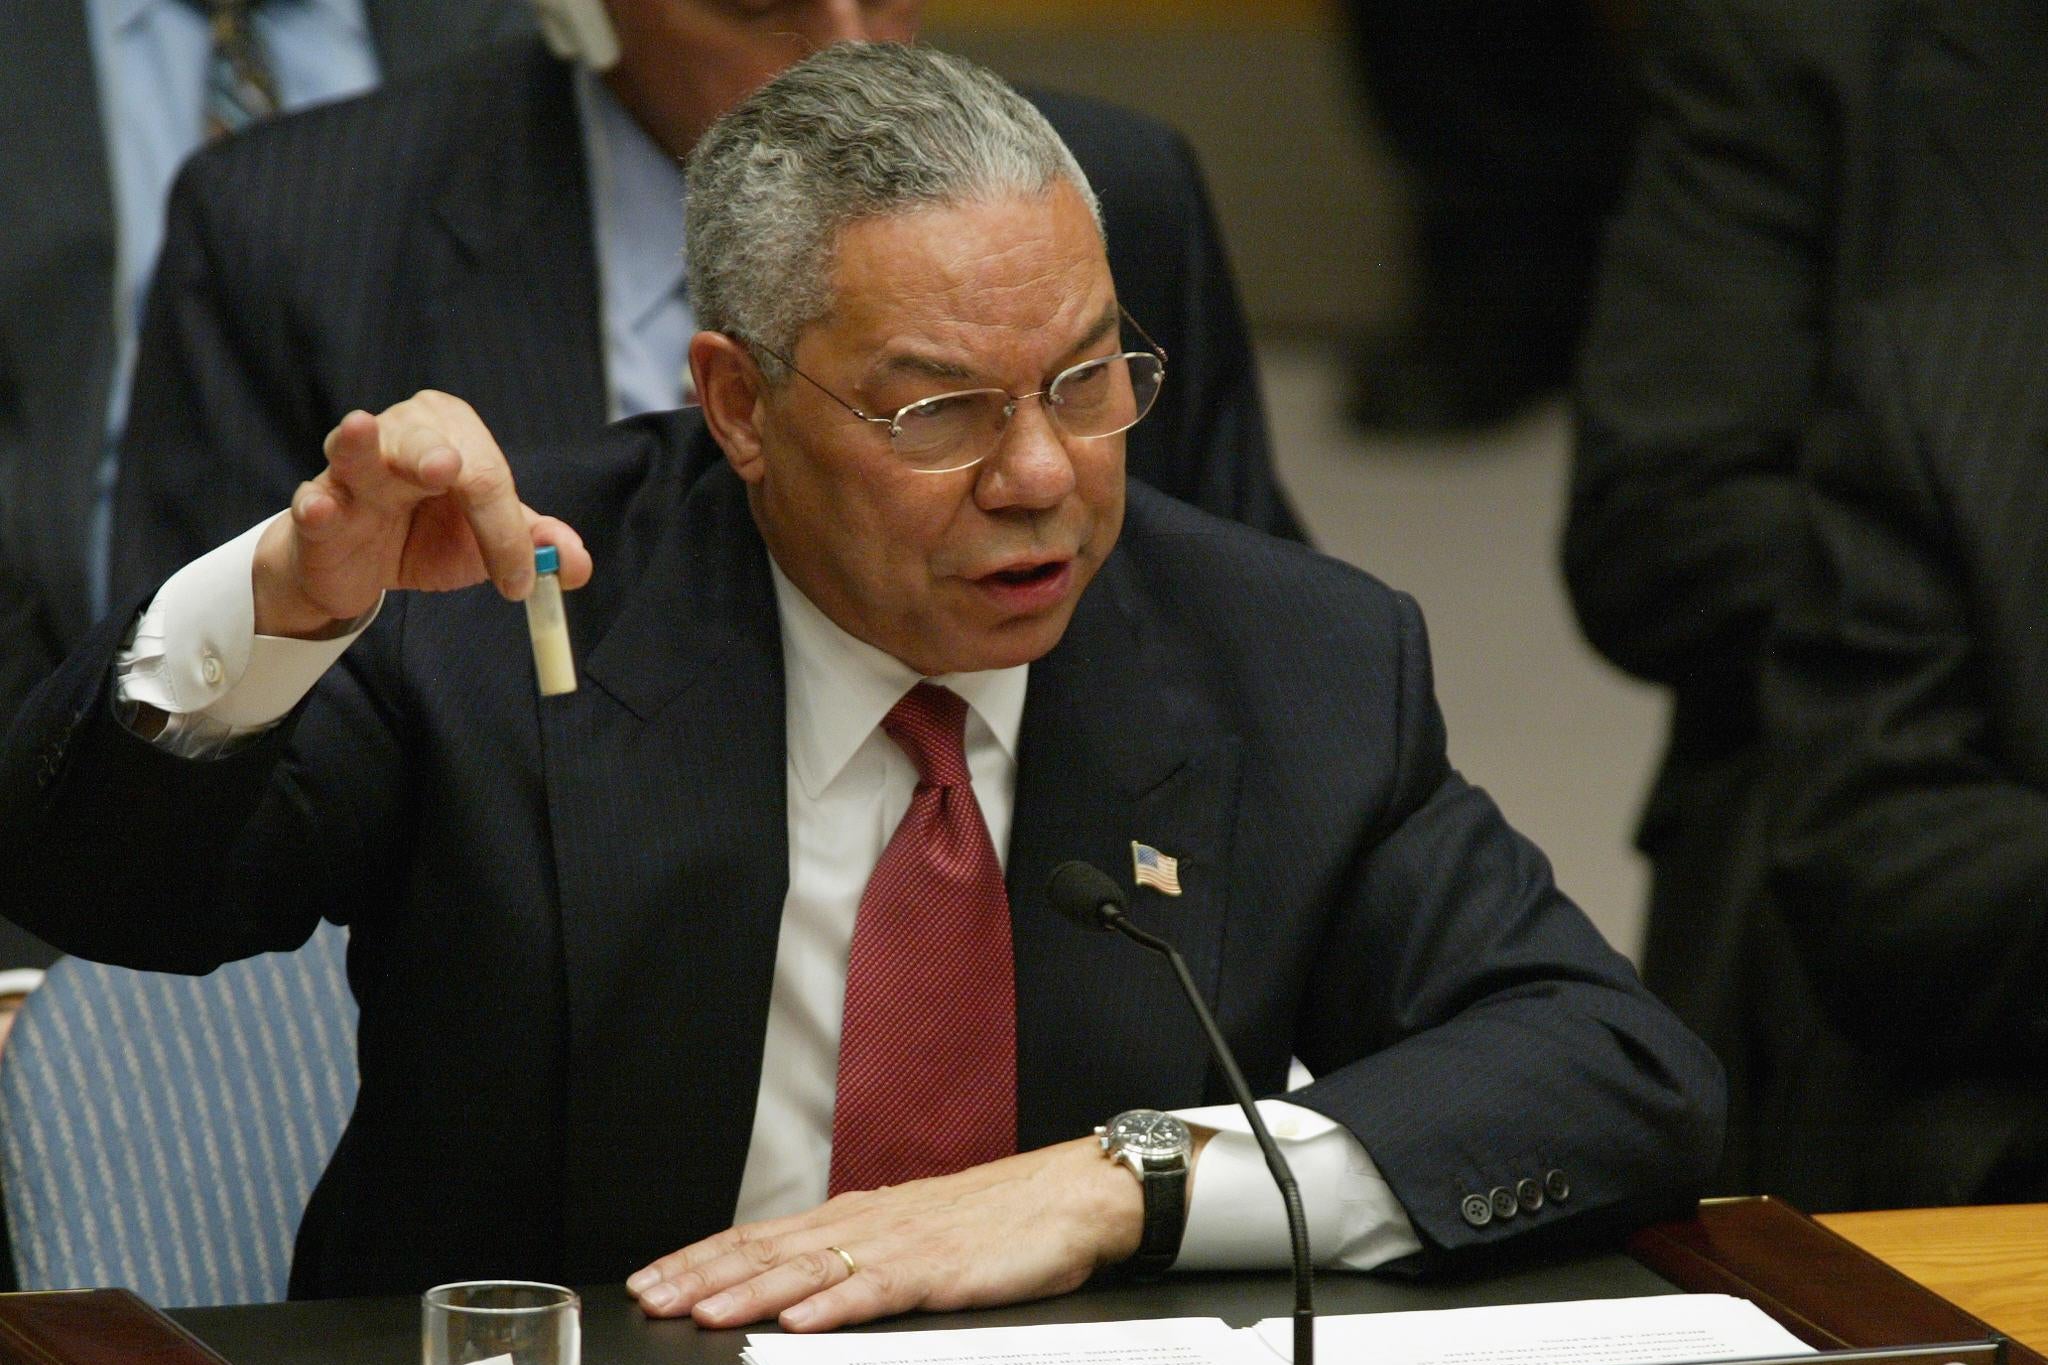 Colin Powell holds up a vial in front of a microphone, seated at the United Nations Security Council on Feb. 5, 2003.